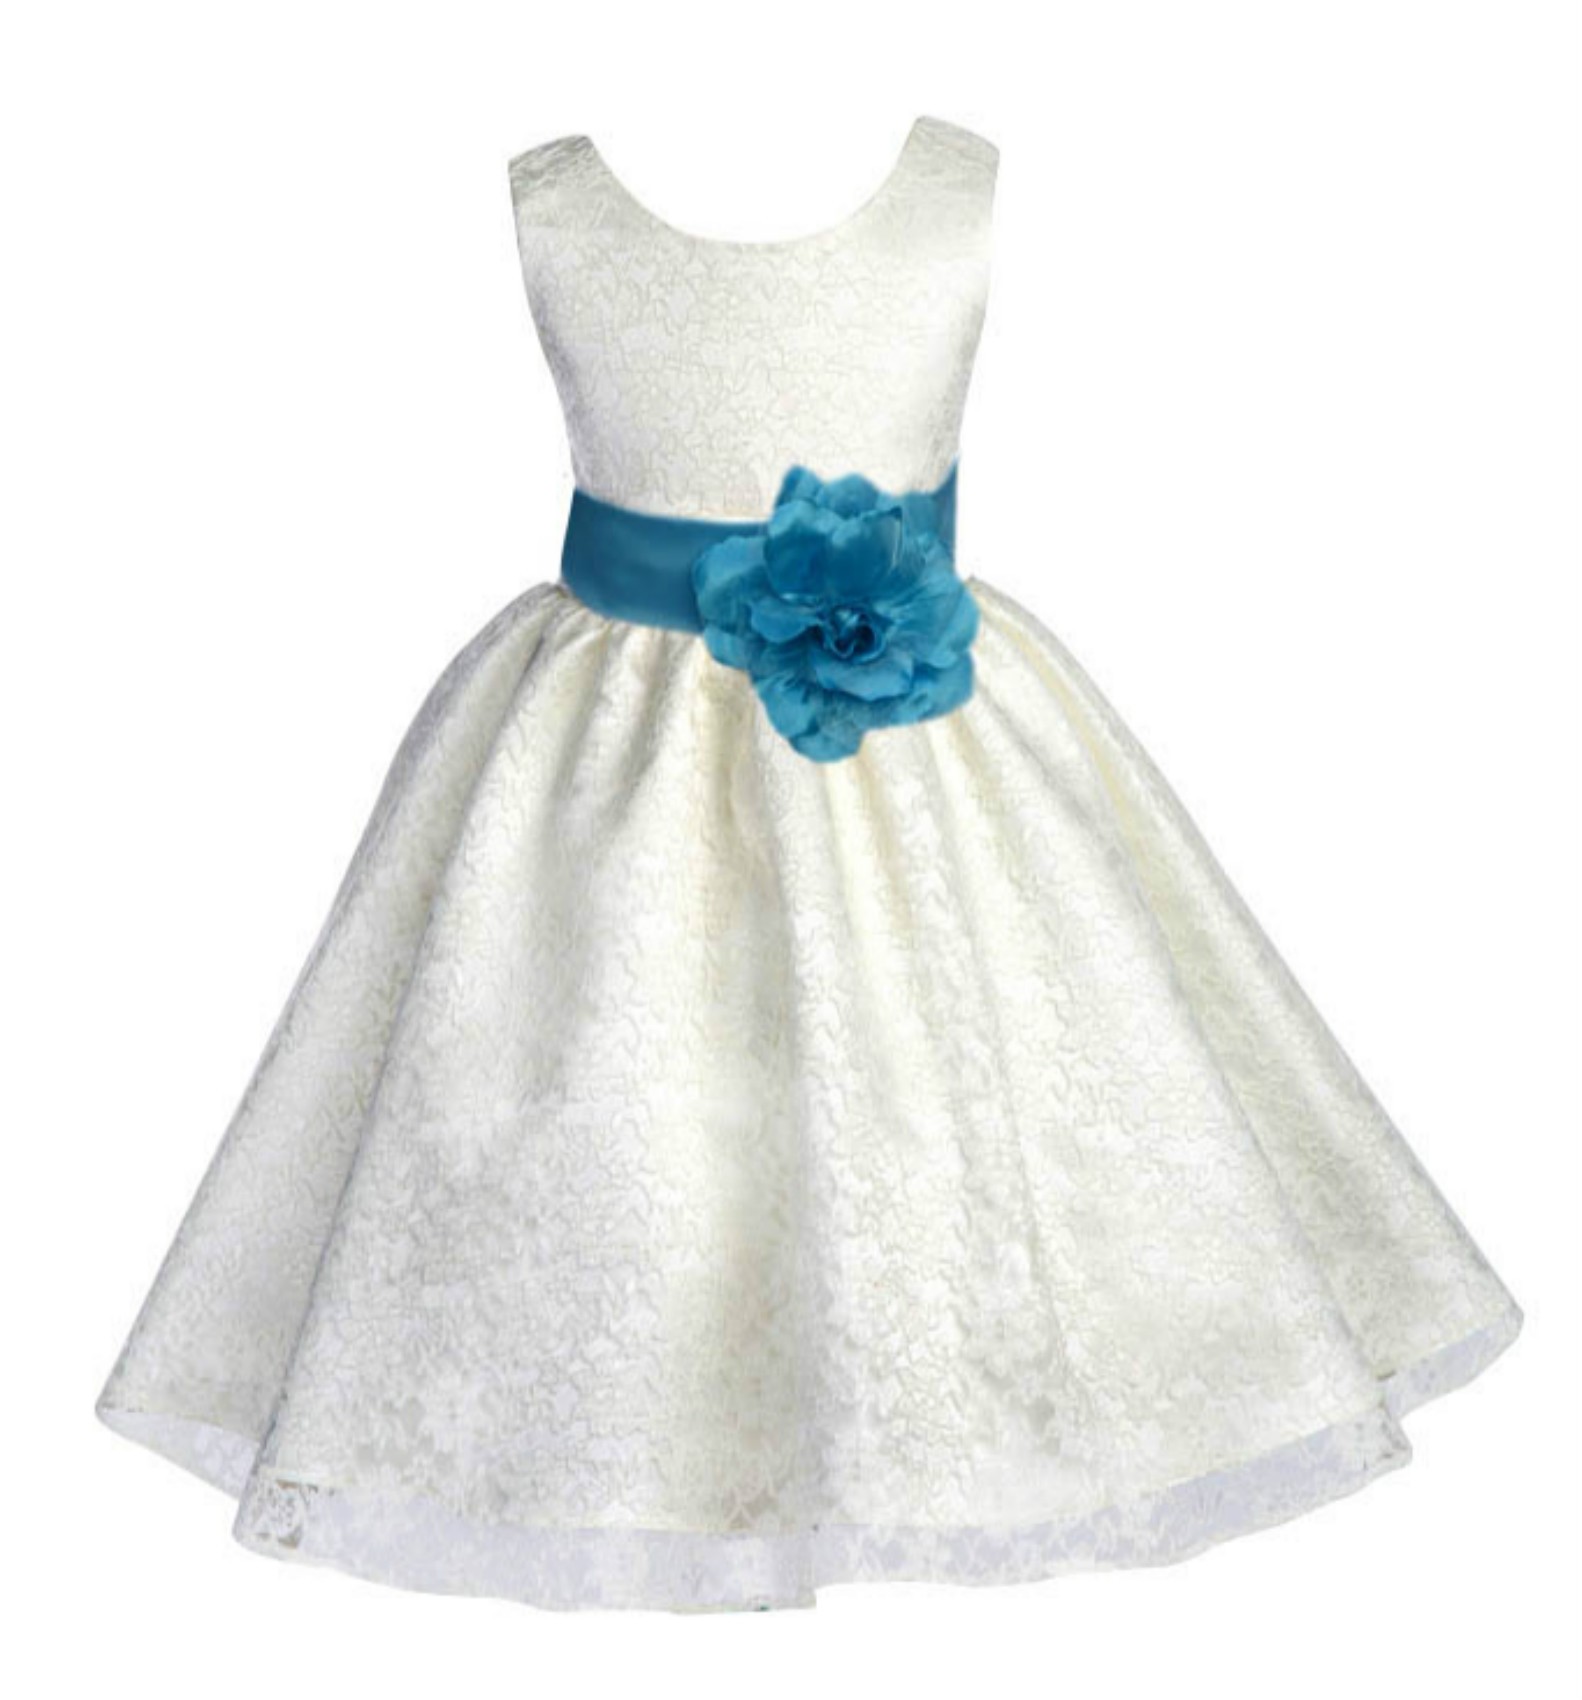 Ivory/Turquoise Floral Lace Overlay Flower Girl Dress Special Event 163S